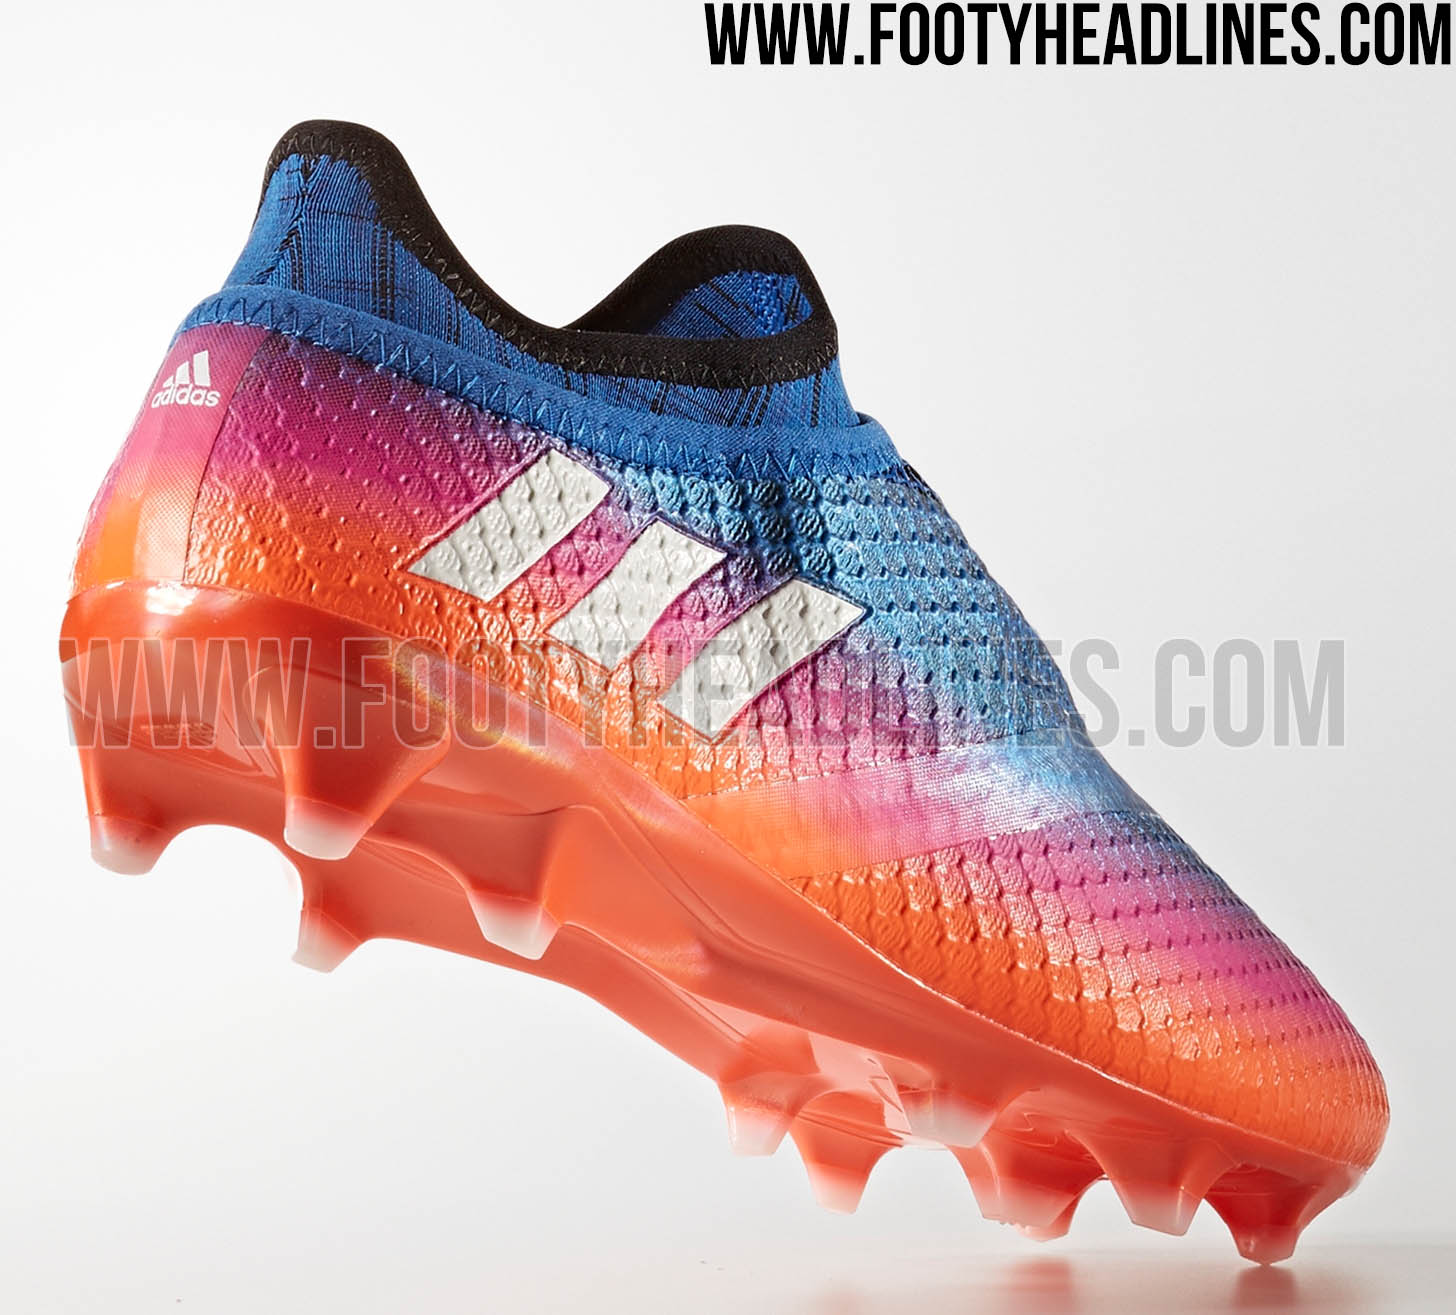 Descanso Todopoderoso Aniquilar Insane Adidas Messi 16+ PureAgility Blue Blast 2017 Boots Leaked - Footy  Headlines